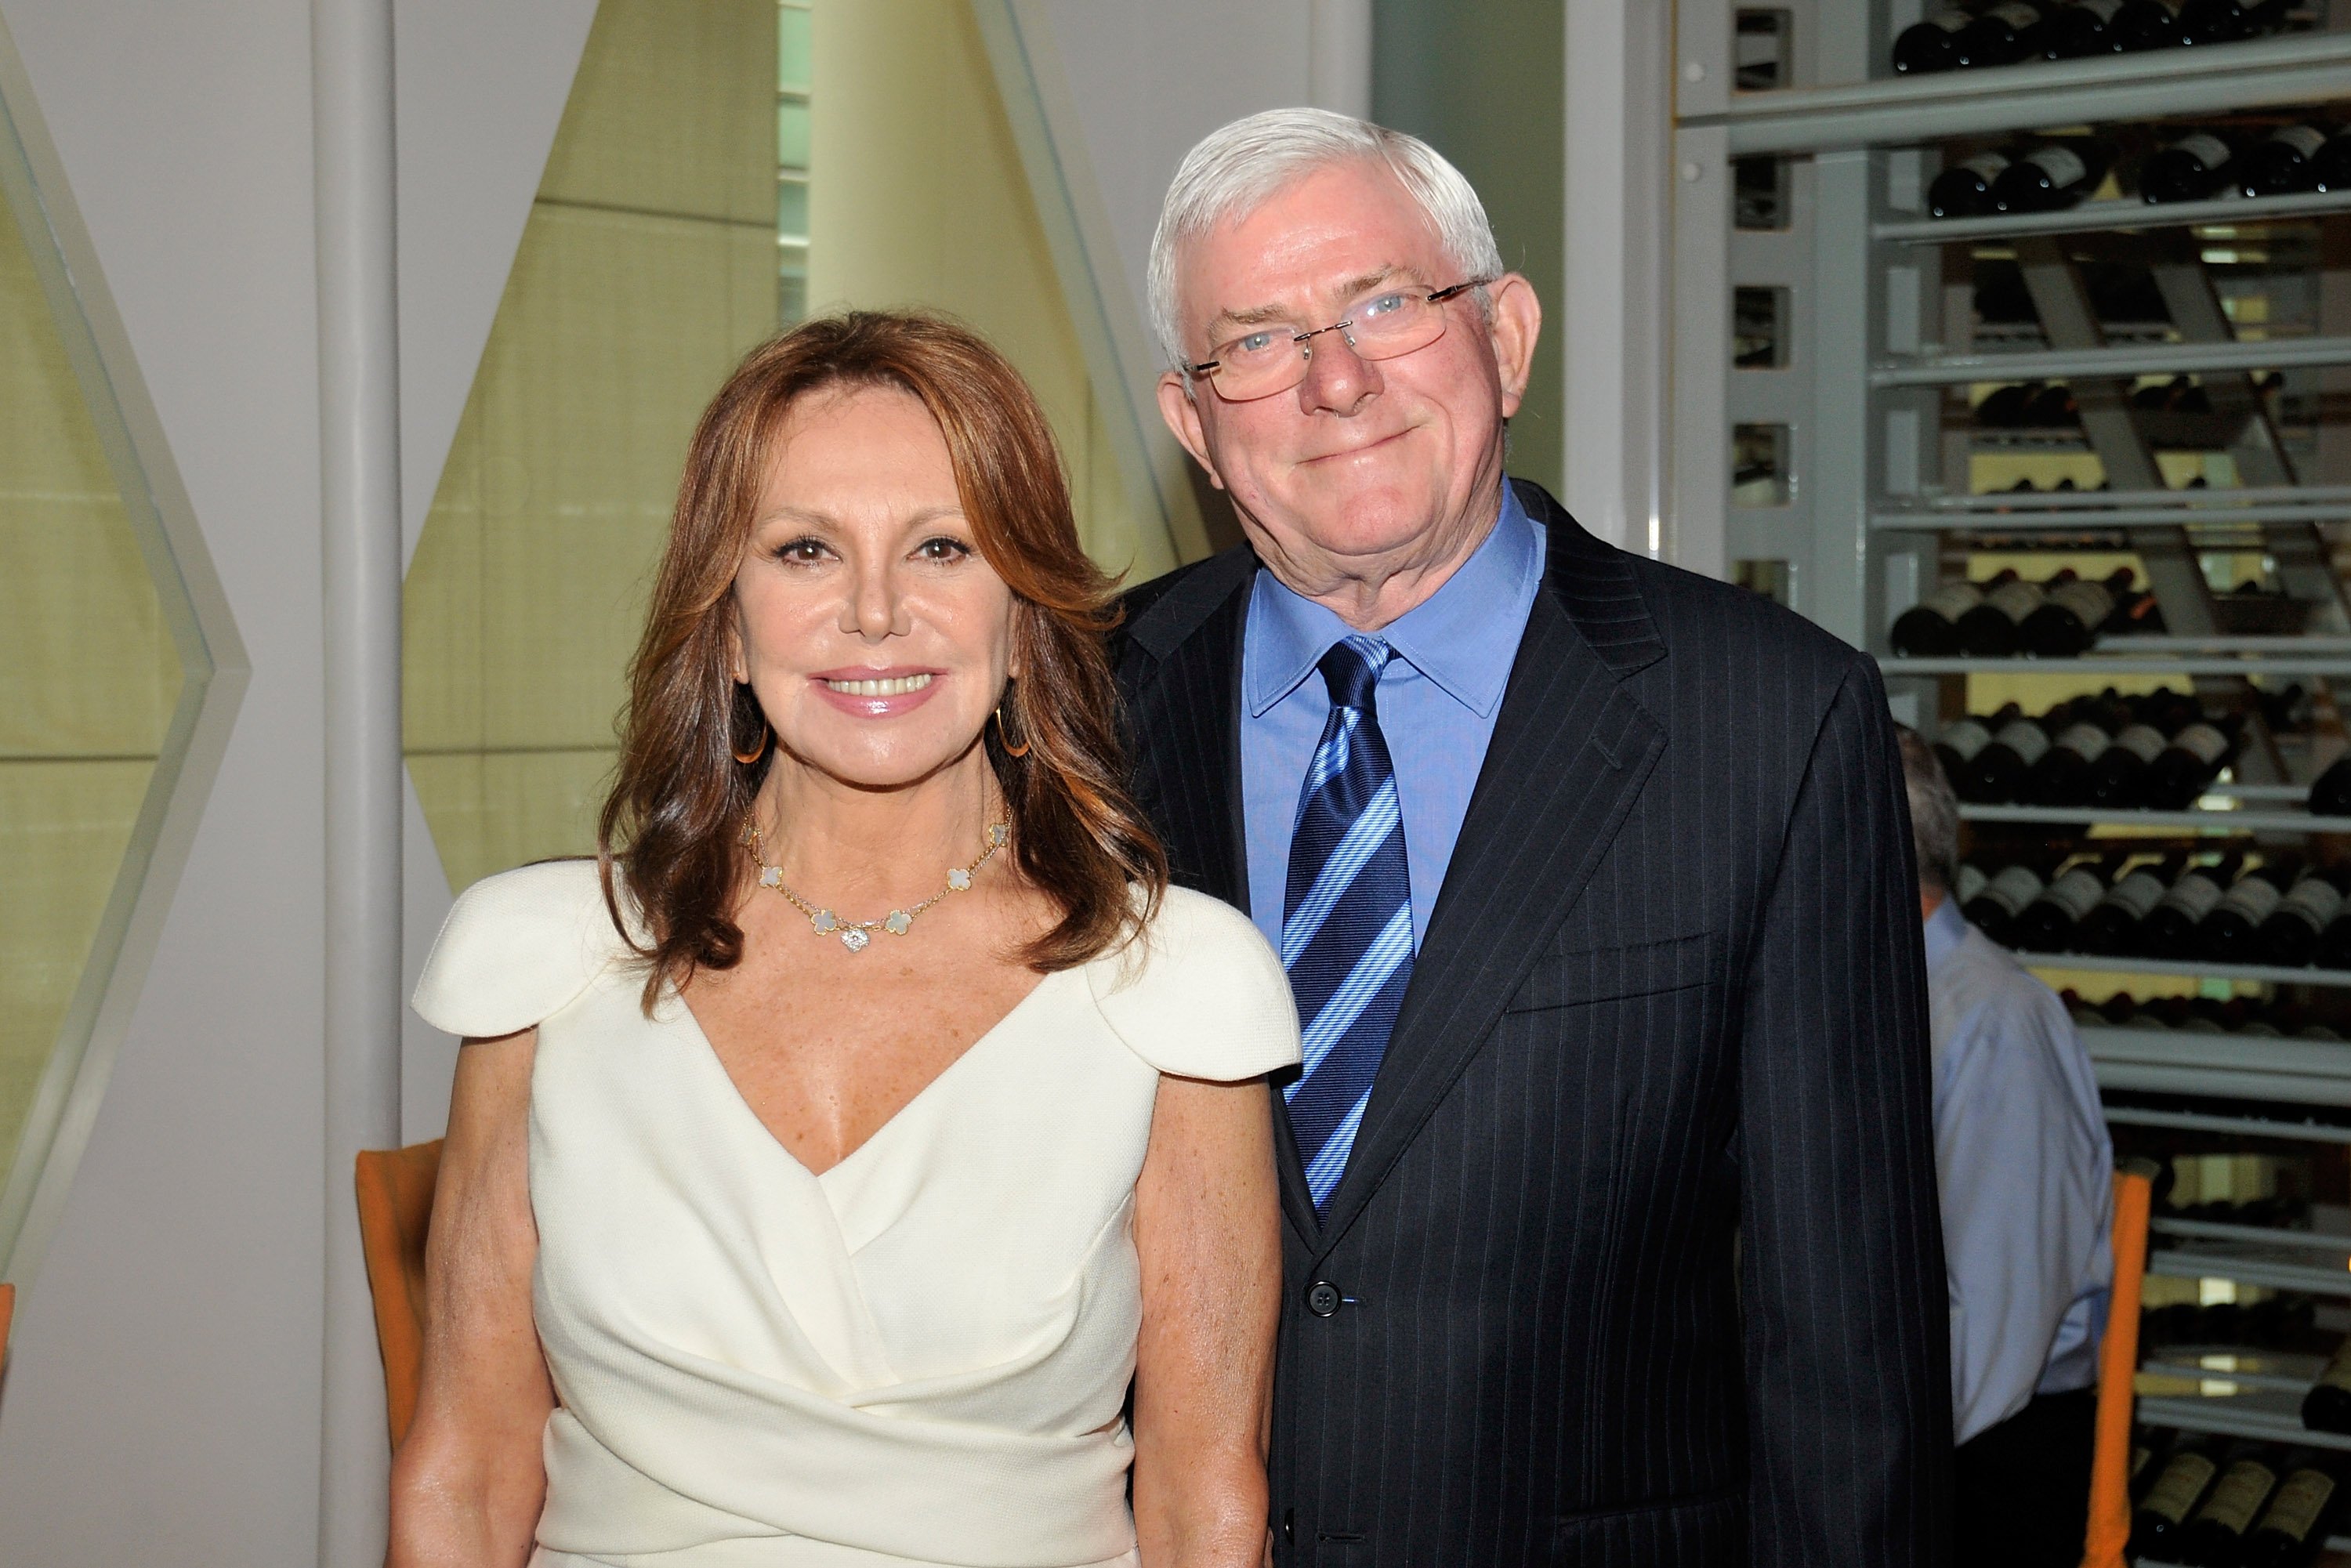 Marlo Thomas and Phil Donahue attend the 2011 Jefferson Awards for Public Service at Le Cirque on June 22, 2011 | Photo: GettyImages